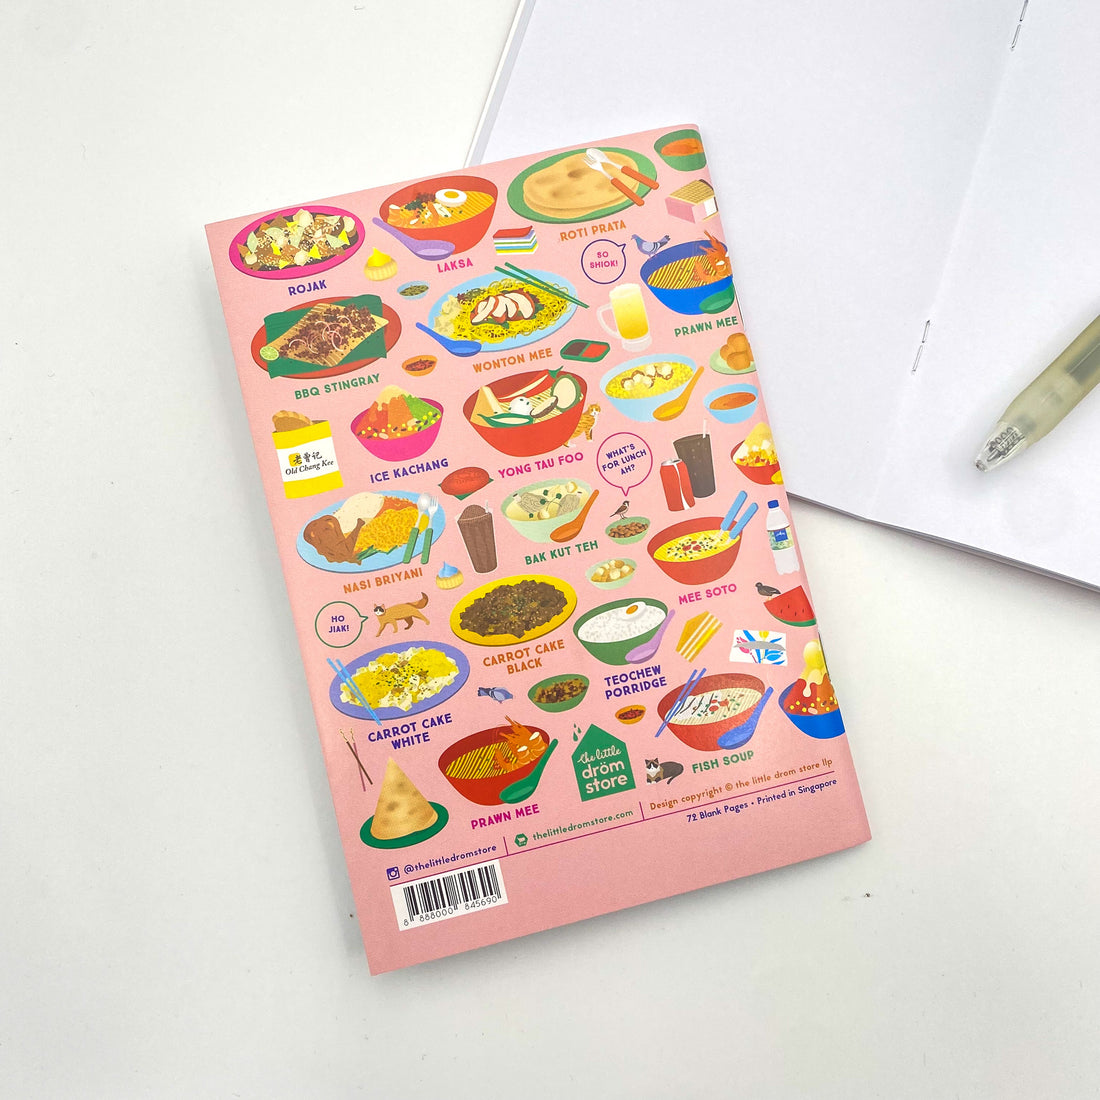 Let's Makan in Singapore Notebook - Pink